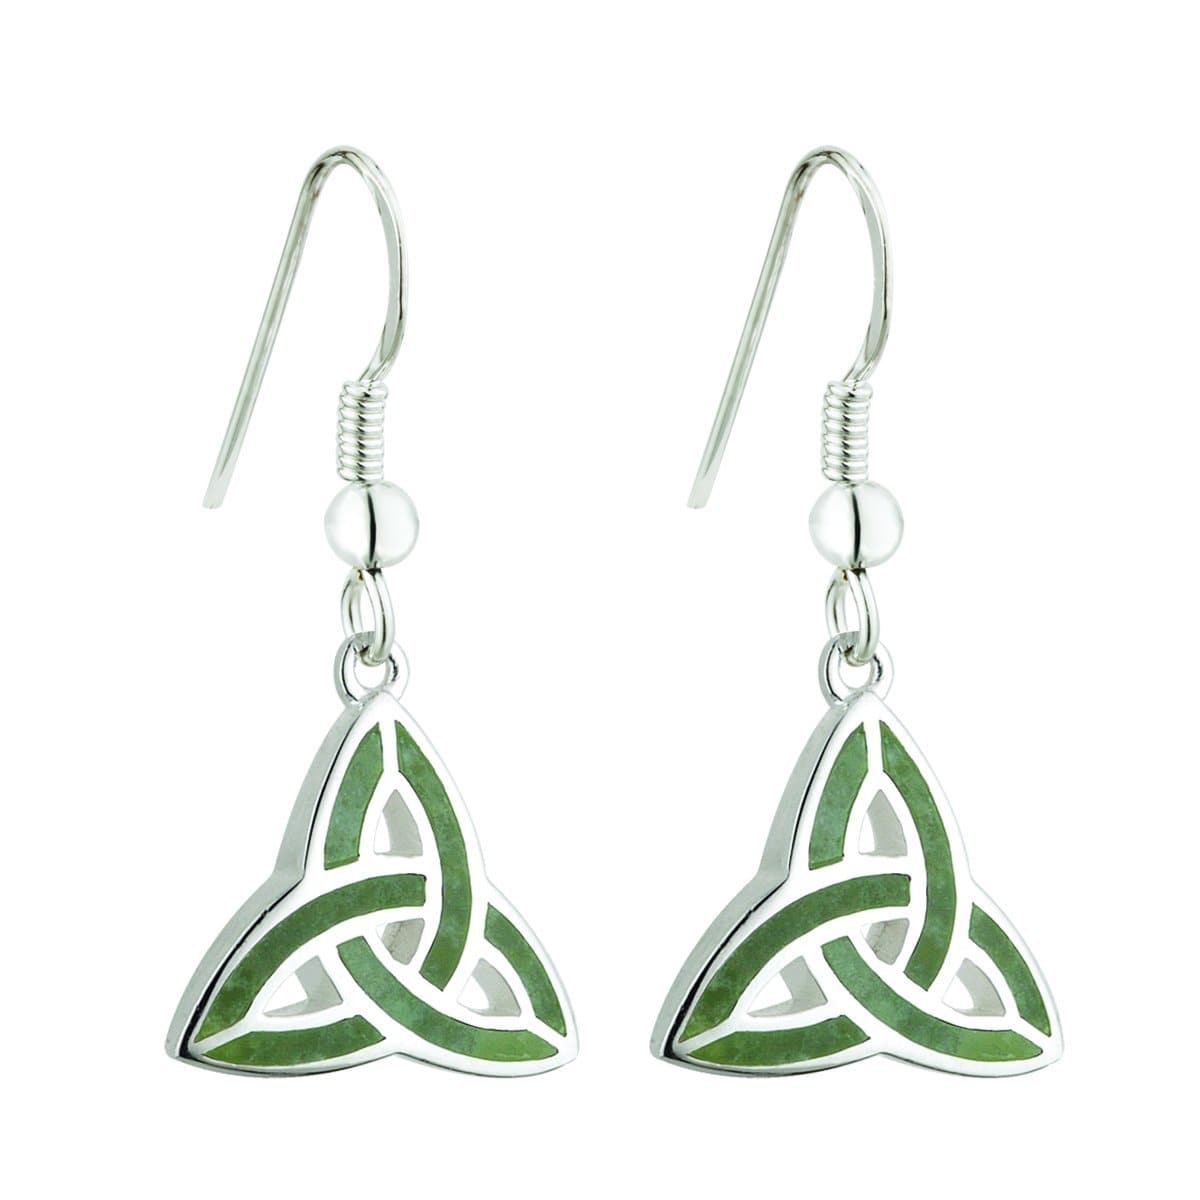 Irish Jewelry for Women Trinity Knot Earrings Sterling Silver & Connemara Marble Made by Our Maker-Partner in Co. Dublin